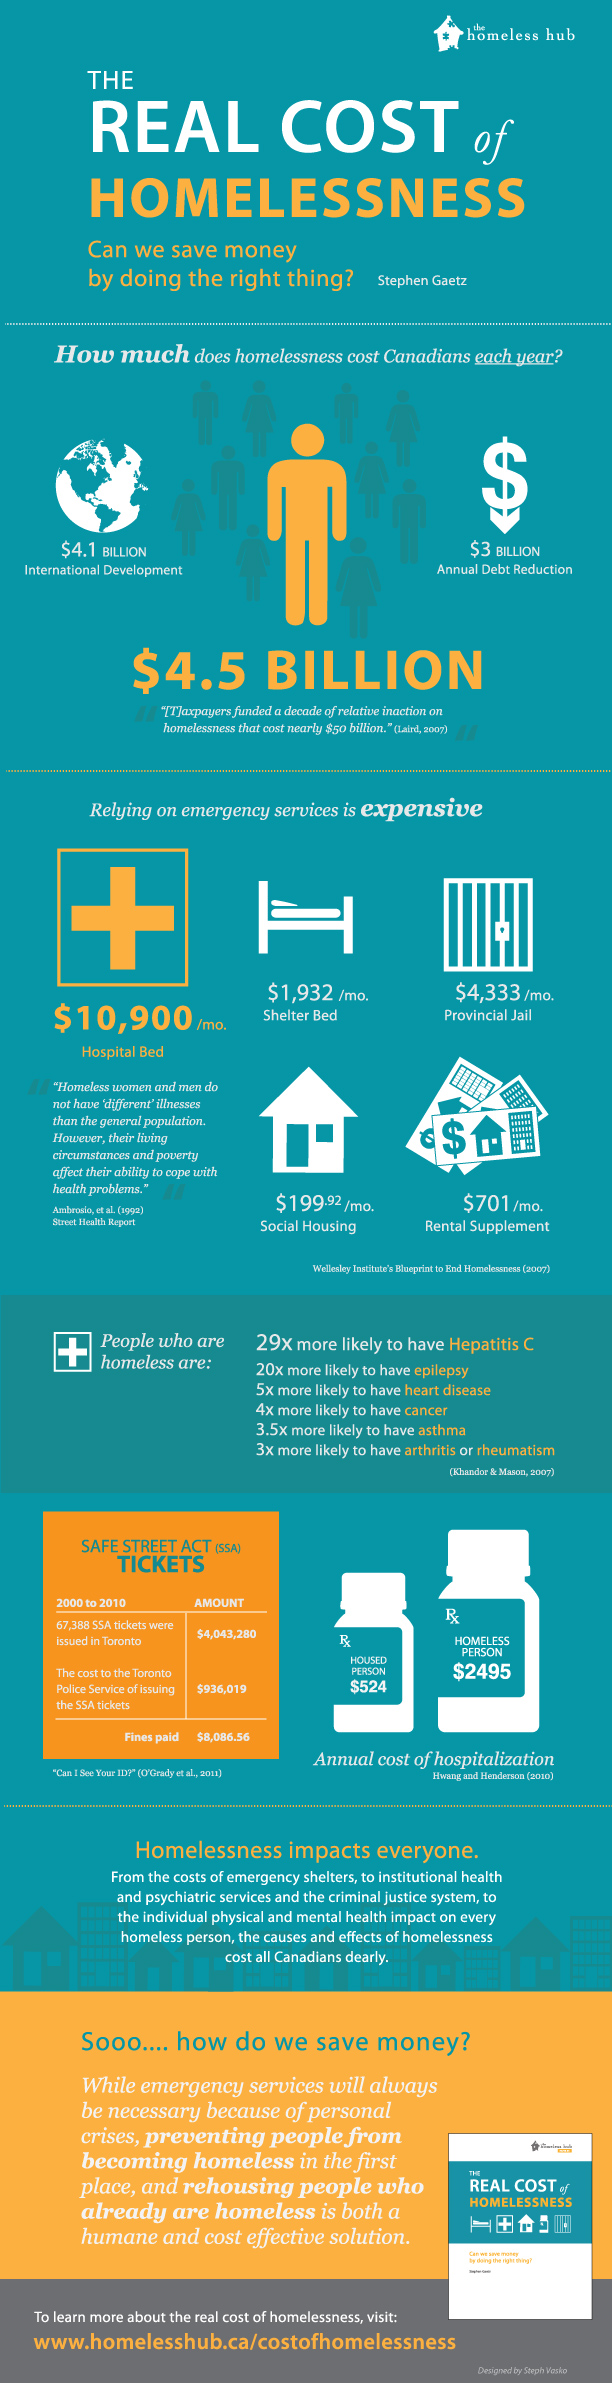 Cost of Homelessness infographic